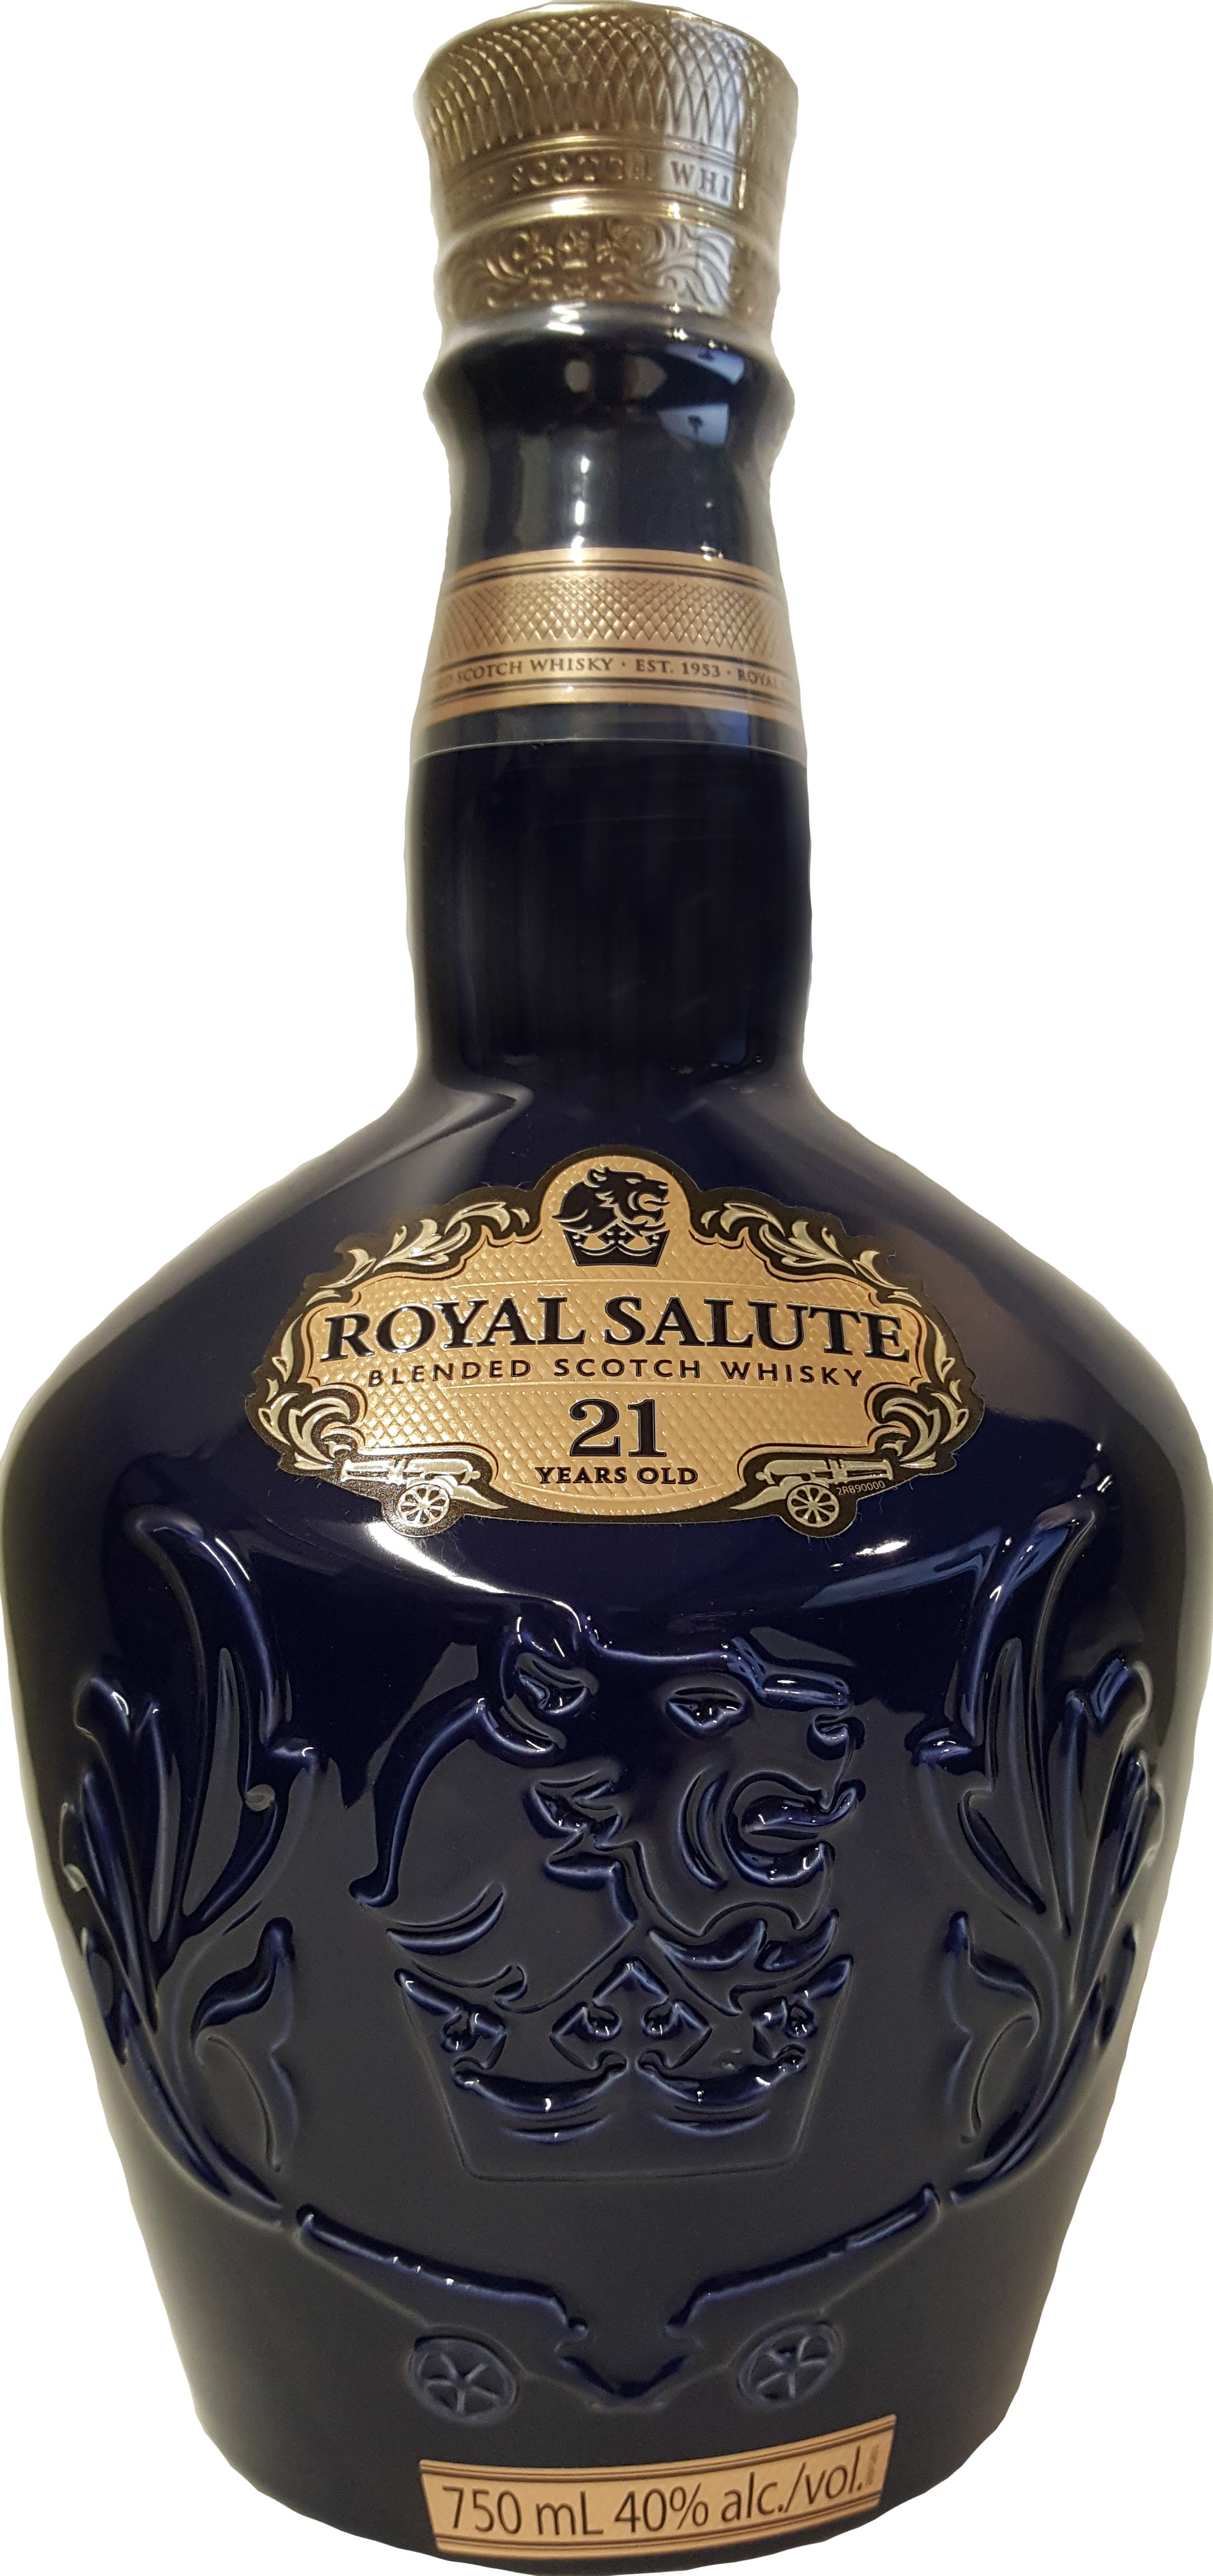 Chivas Regal Royal Salute Blended Scotch Whisky 21 year